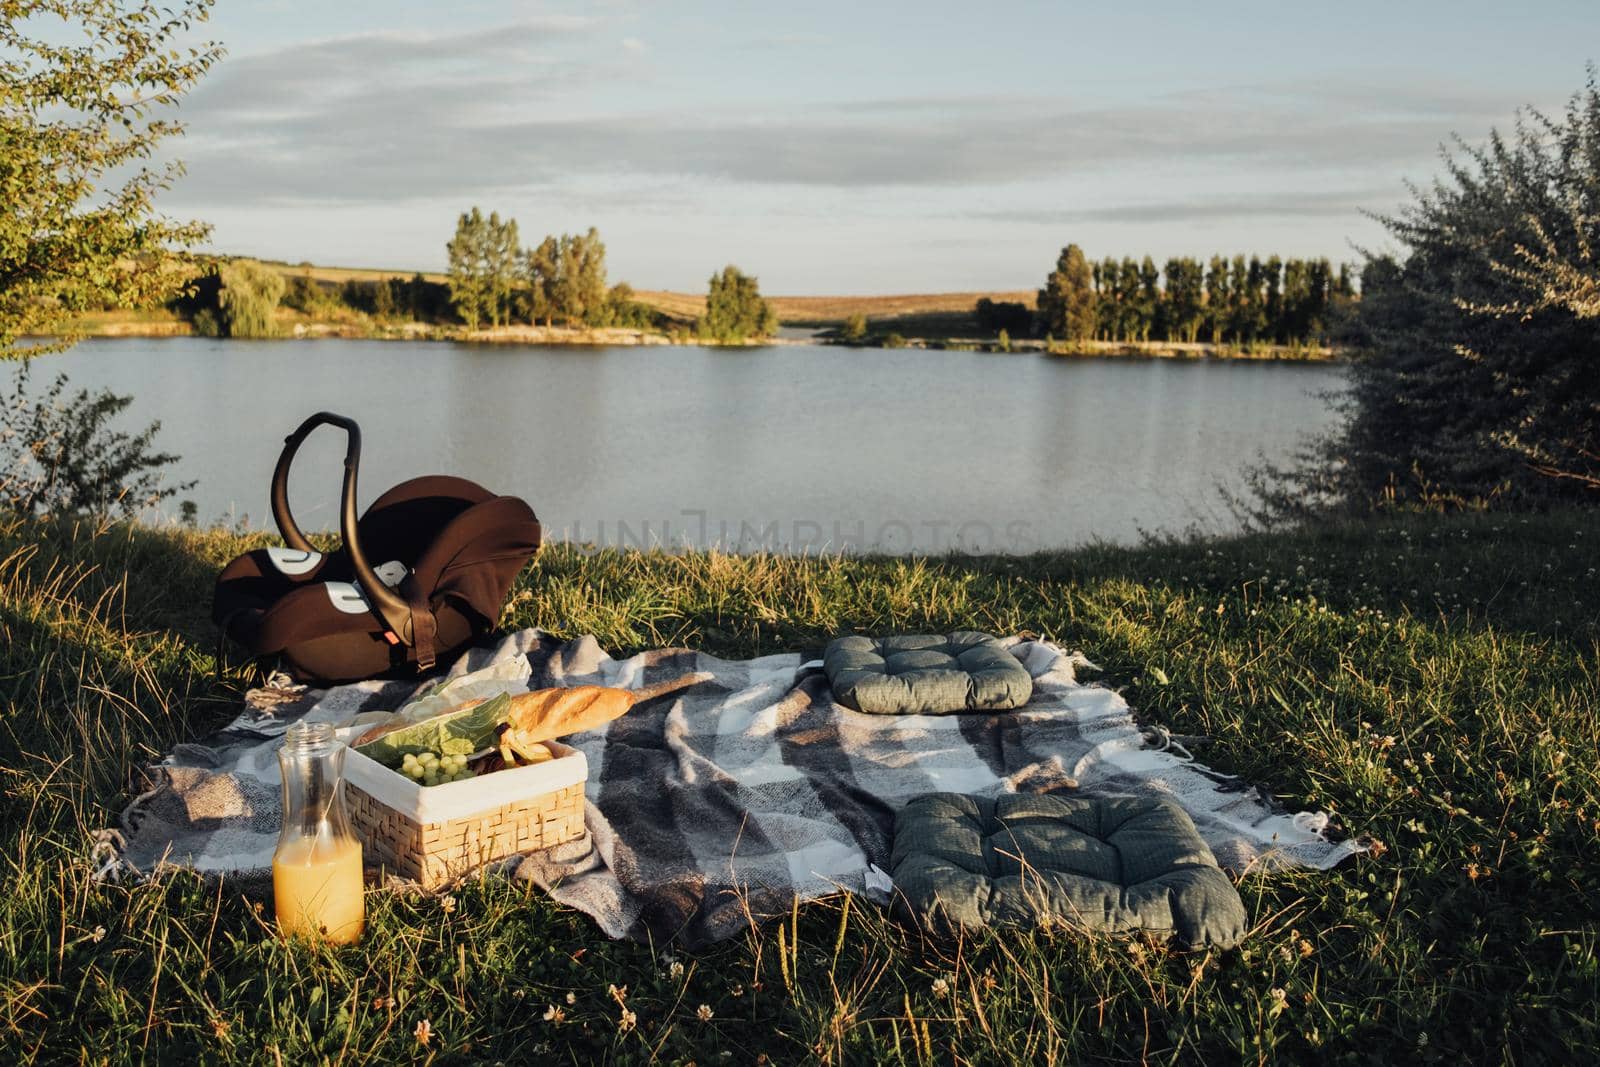 Picnic Set Outdoors by Lake at Sunset, Child Car Seat, Fruit Basket and Bottle of Juice on Plaid